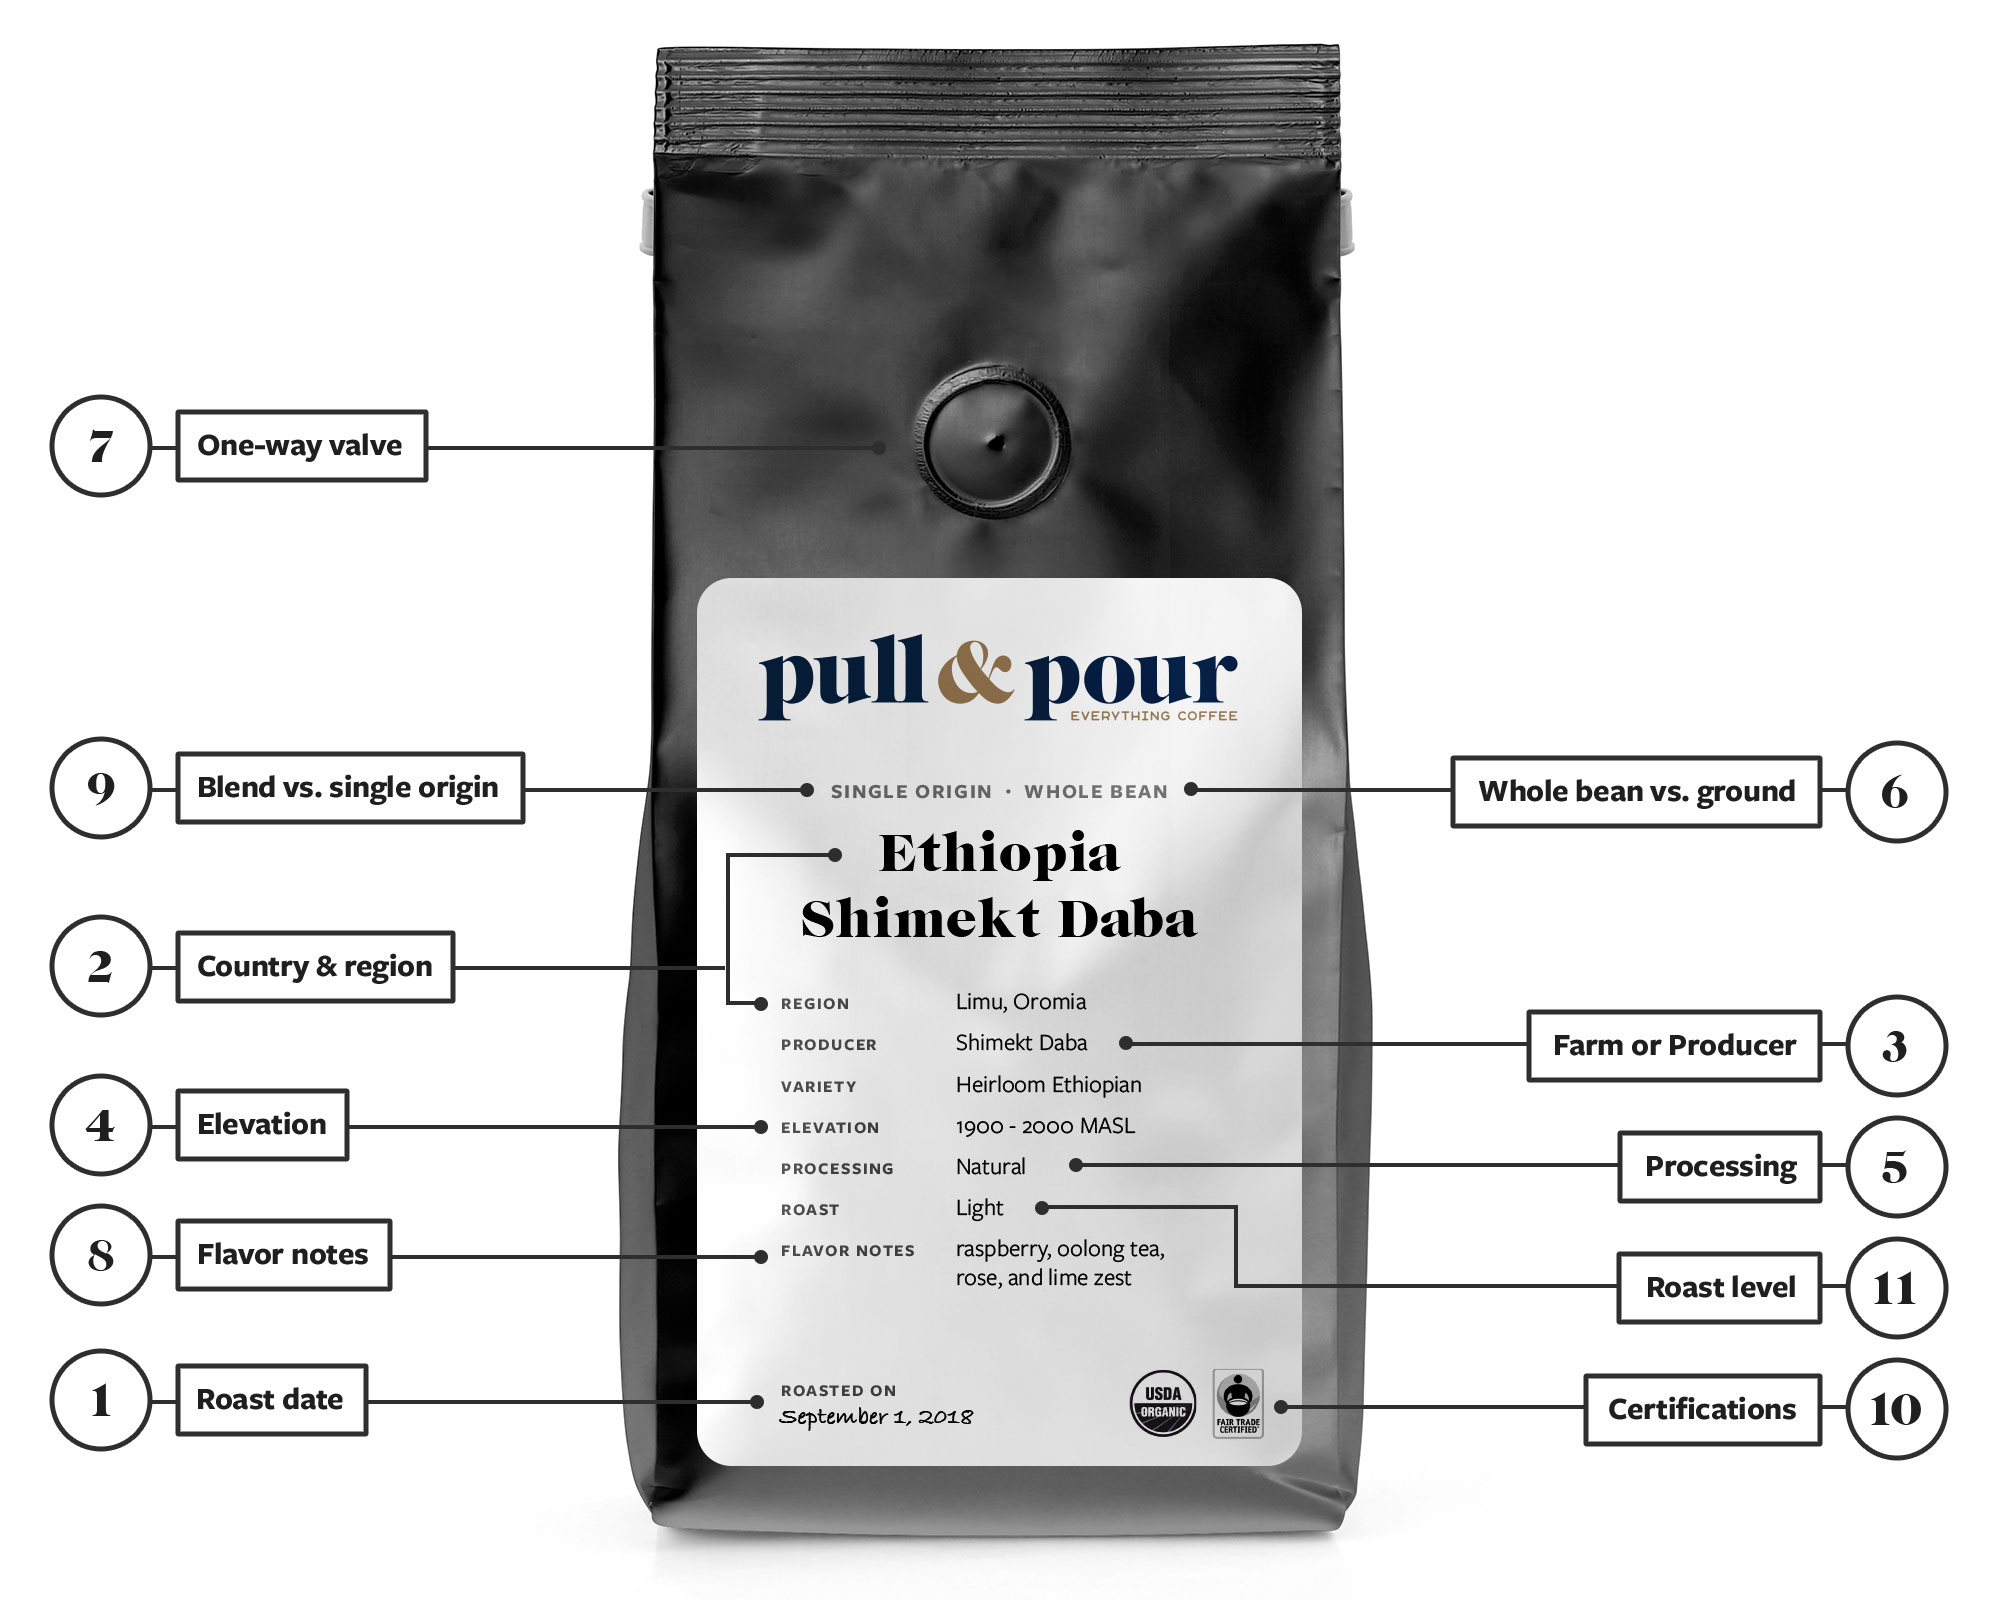 Download How to Buy the Best Coffee Based on the Bag and Packaging ...